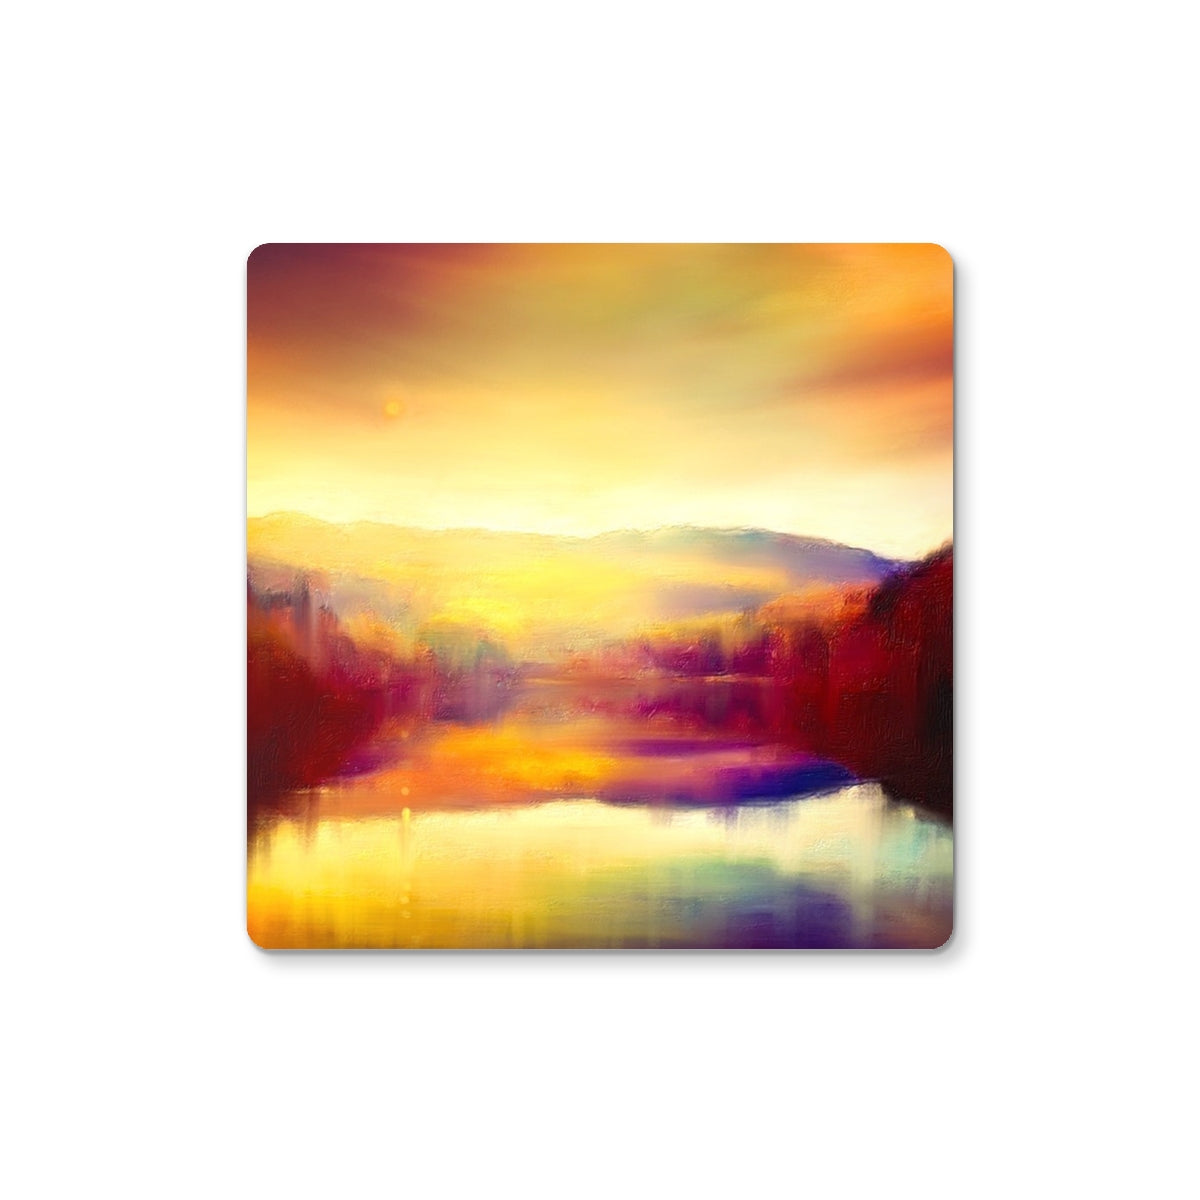 Loch Faskally Dusk Art Gifts Coaster-Coasters-Scottish Lochs & Mountains Art Gallery-2 Coasters-Paintings, Prints, Homeware, Art Gifts From Scotland By Scottish Artist Kevin Hunter